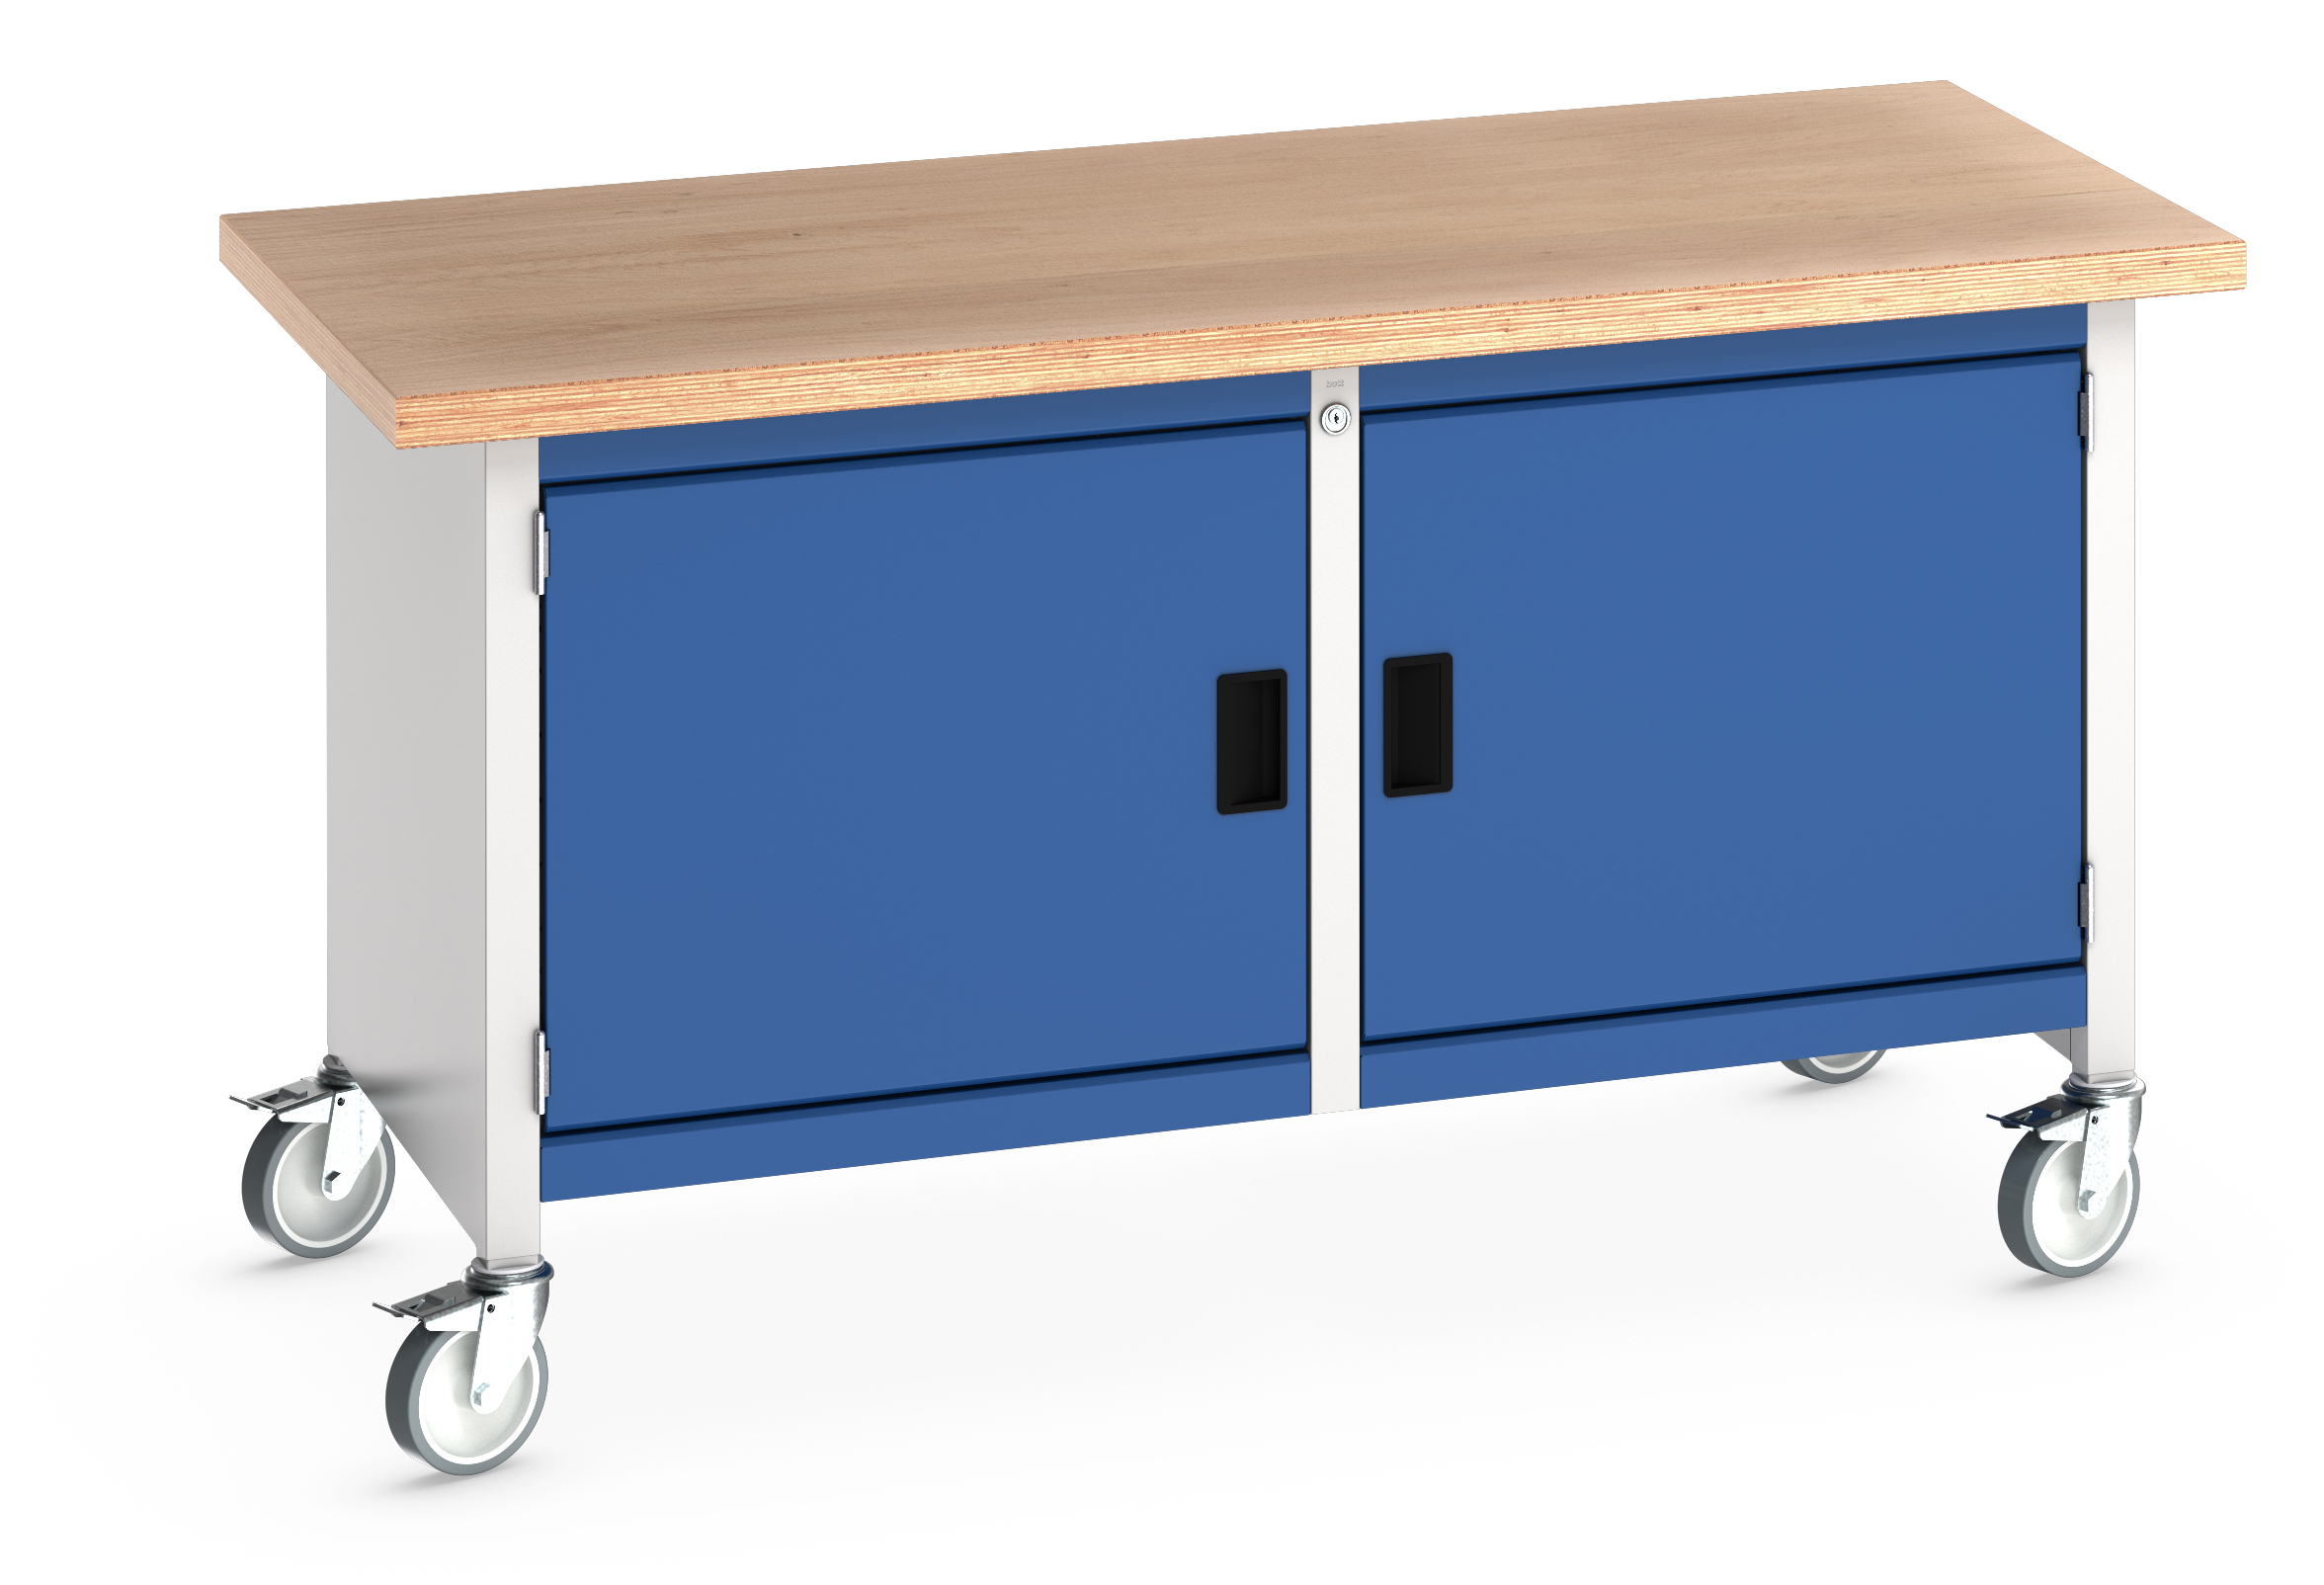 Bott Cubio Mobile Storage Bench With Full Cupboard / Full Cupboard - 41002097.11V